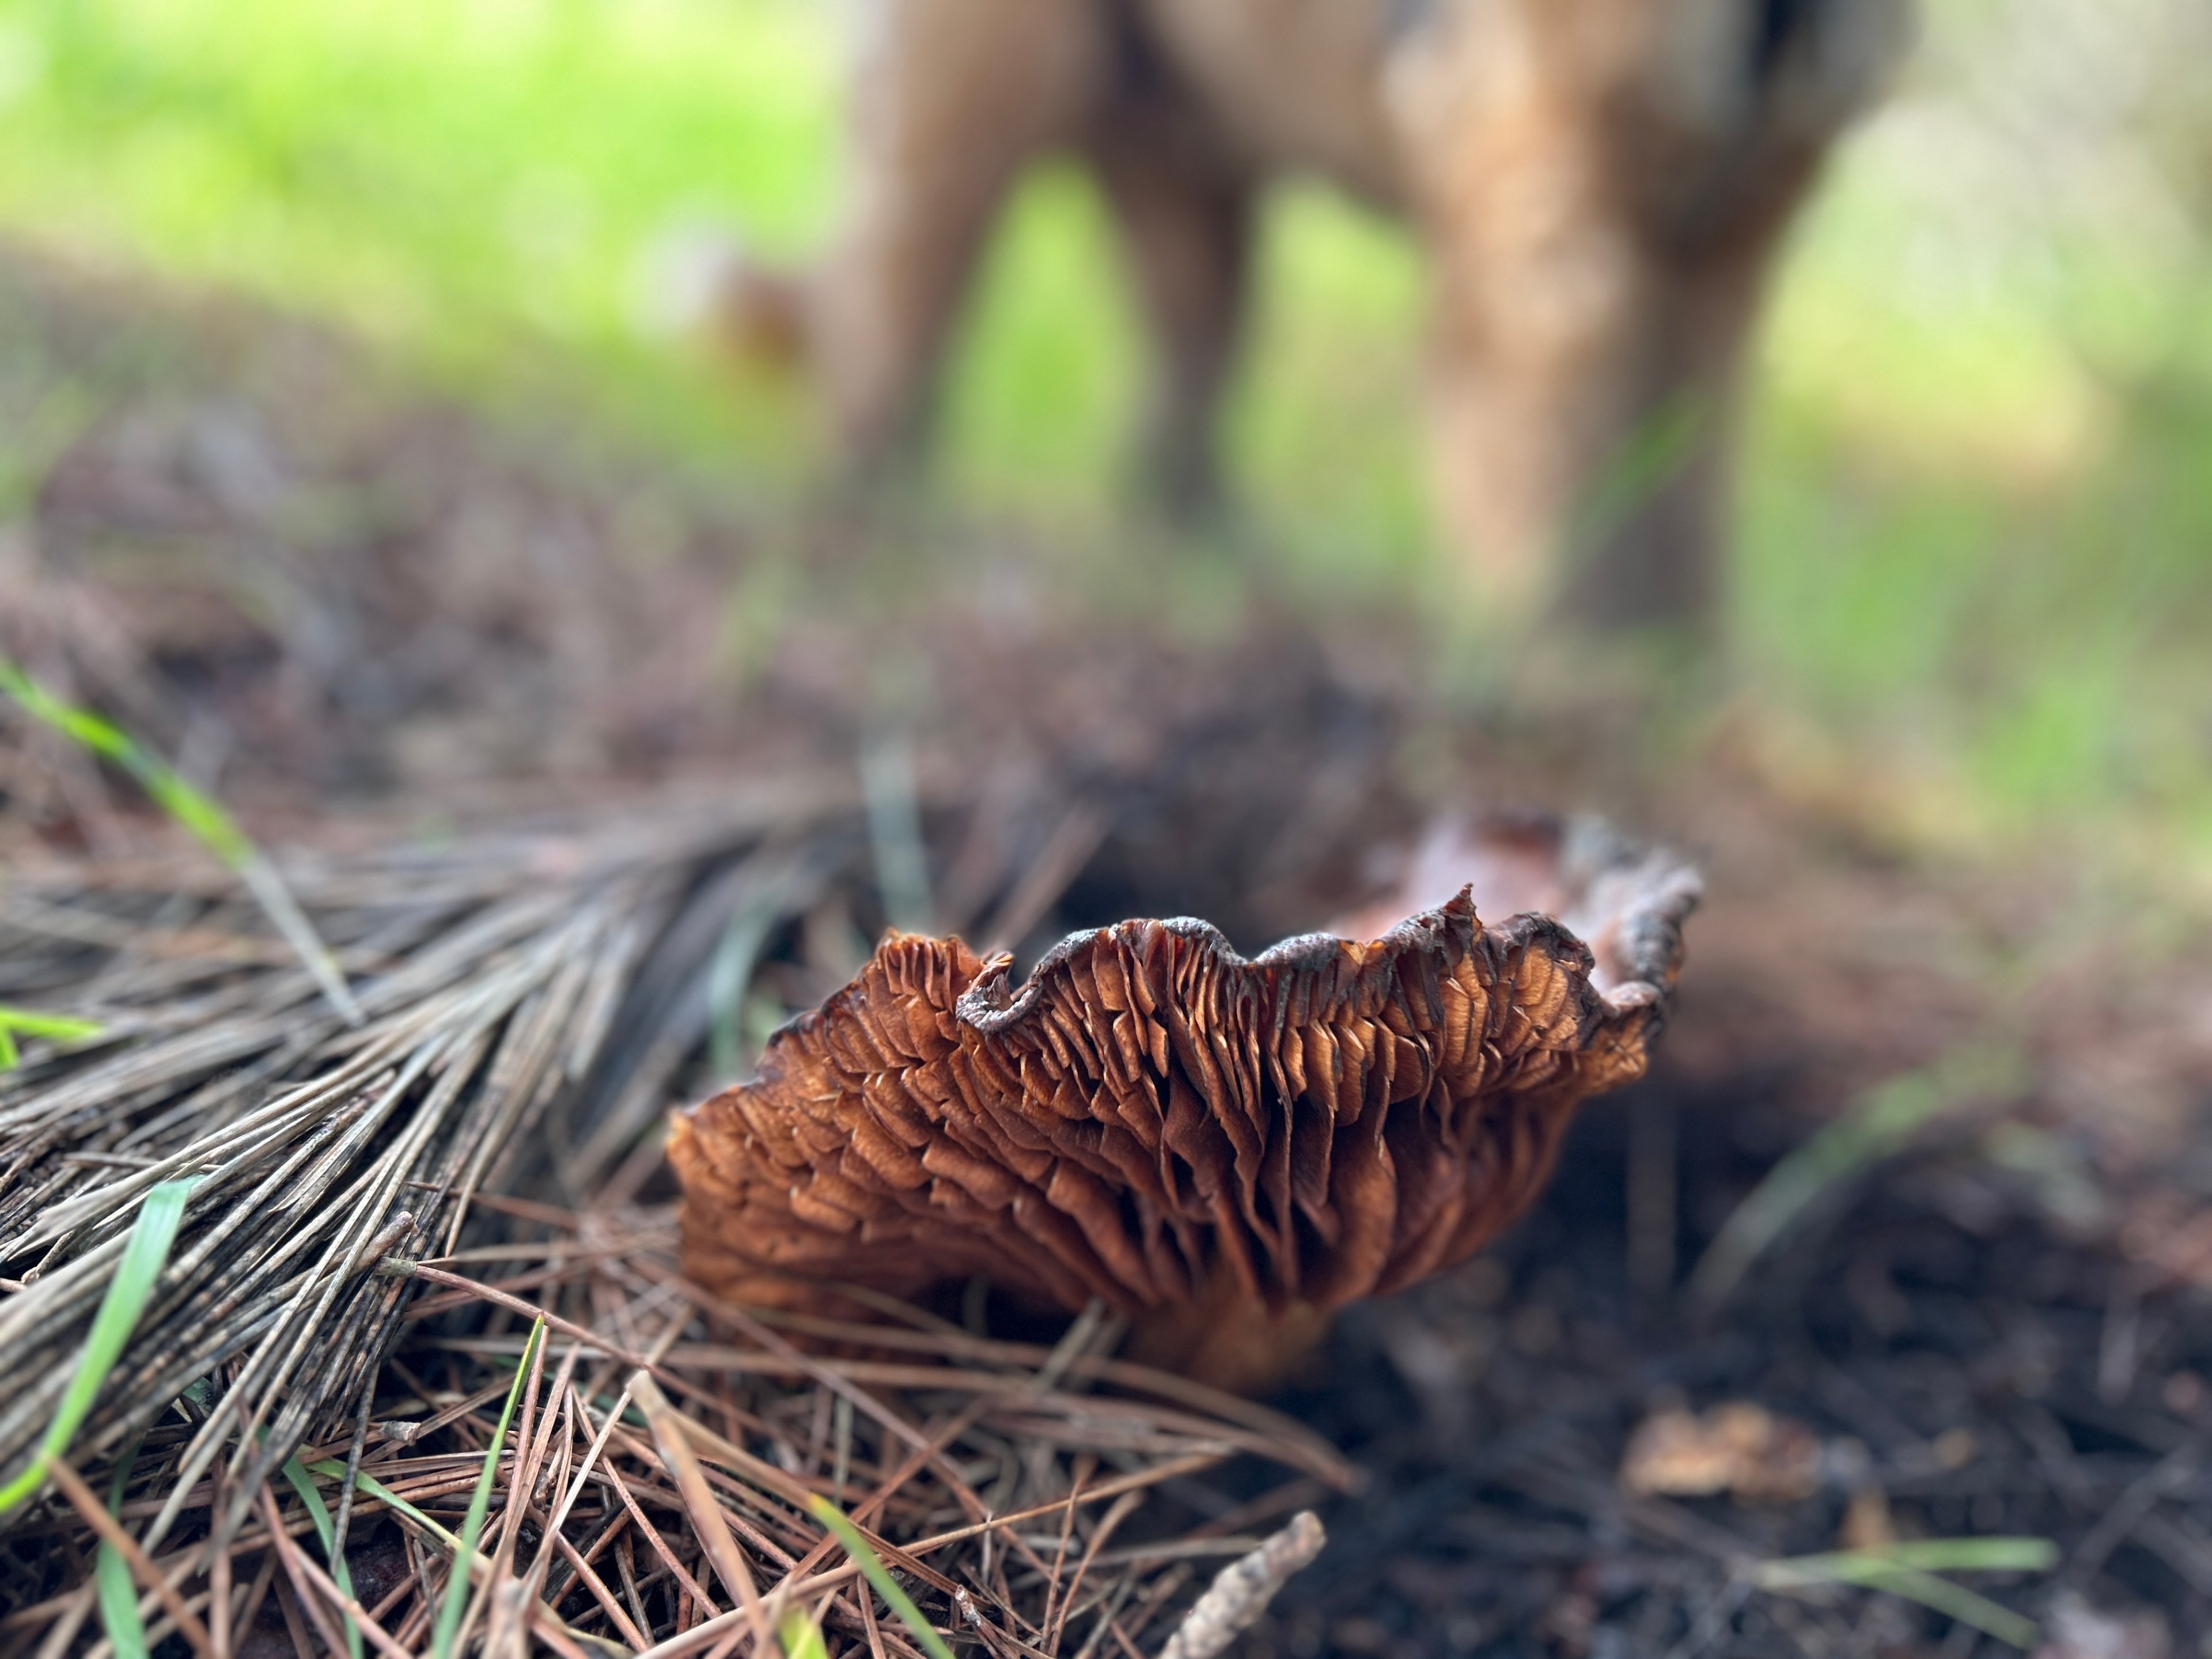 a ridged, orange-brown mushroom pokes out of a forest floor with a dog out of focus in the background